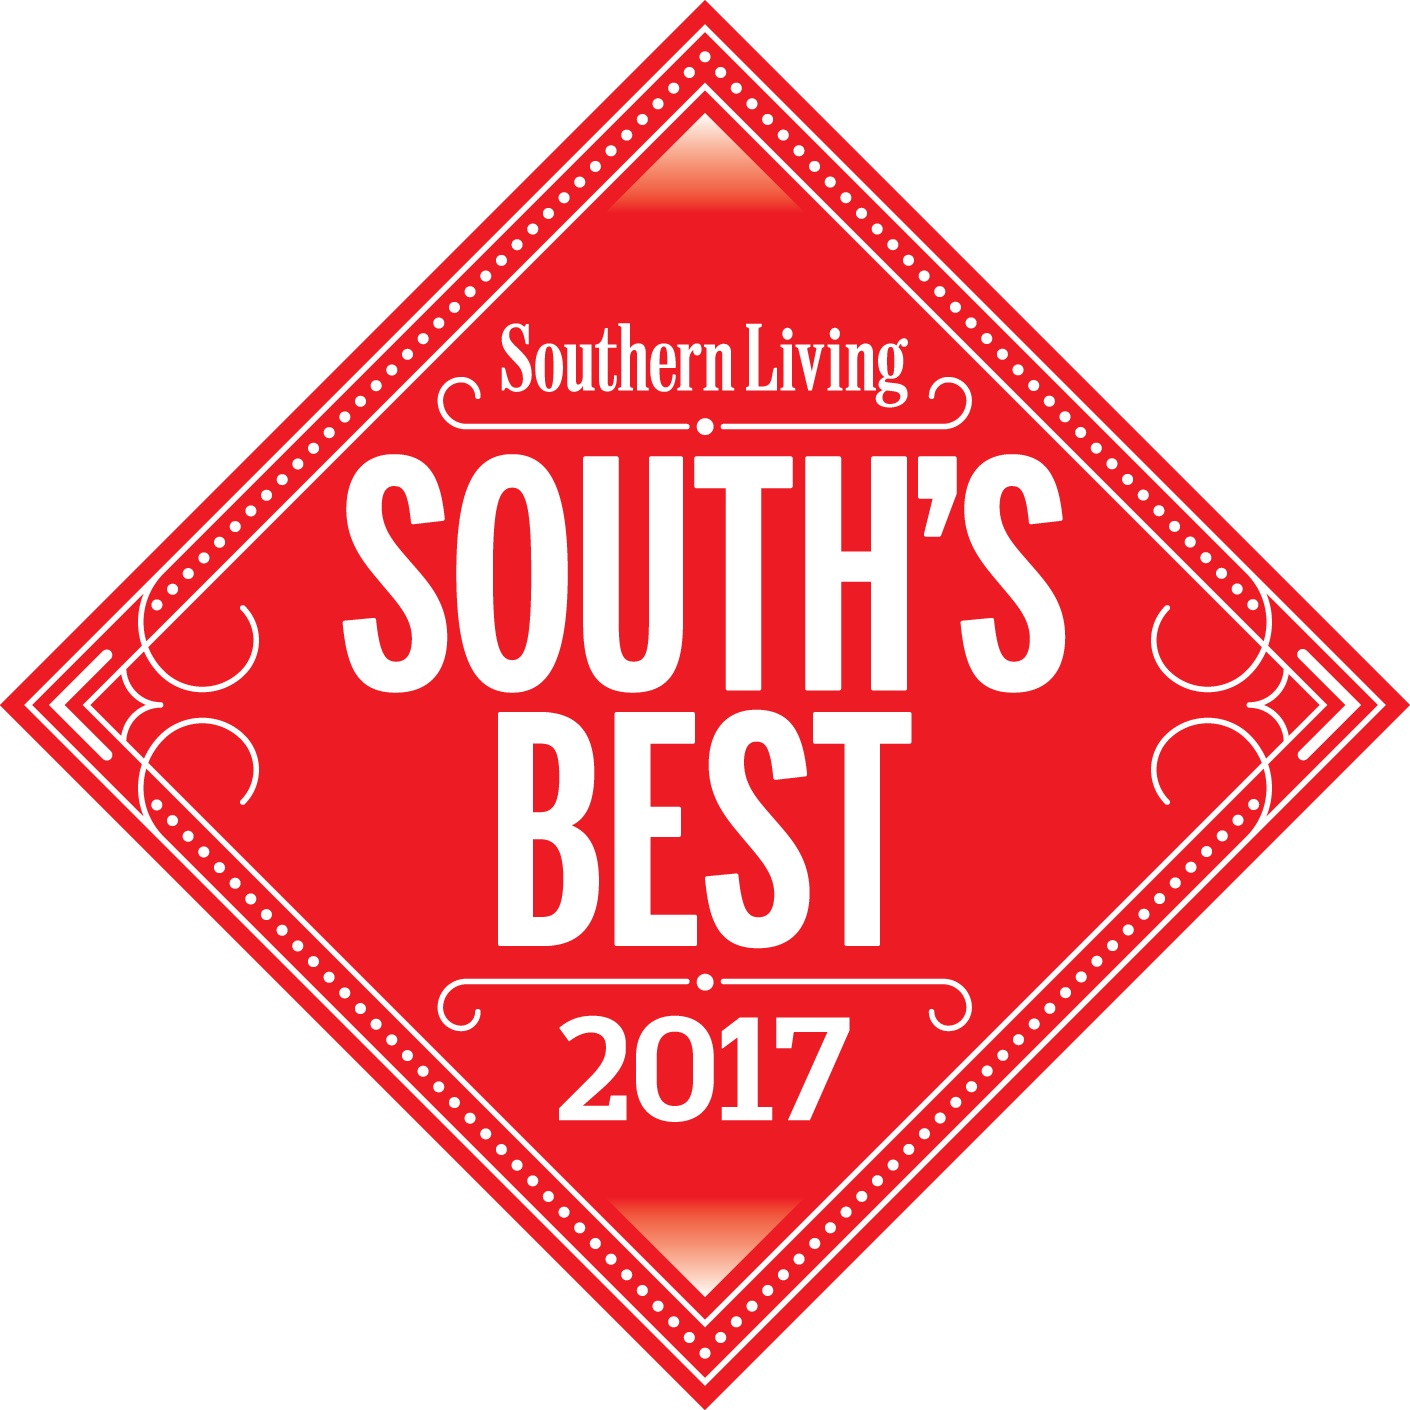 Voted best resort in the south!